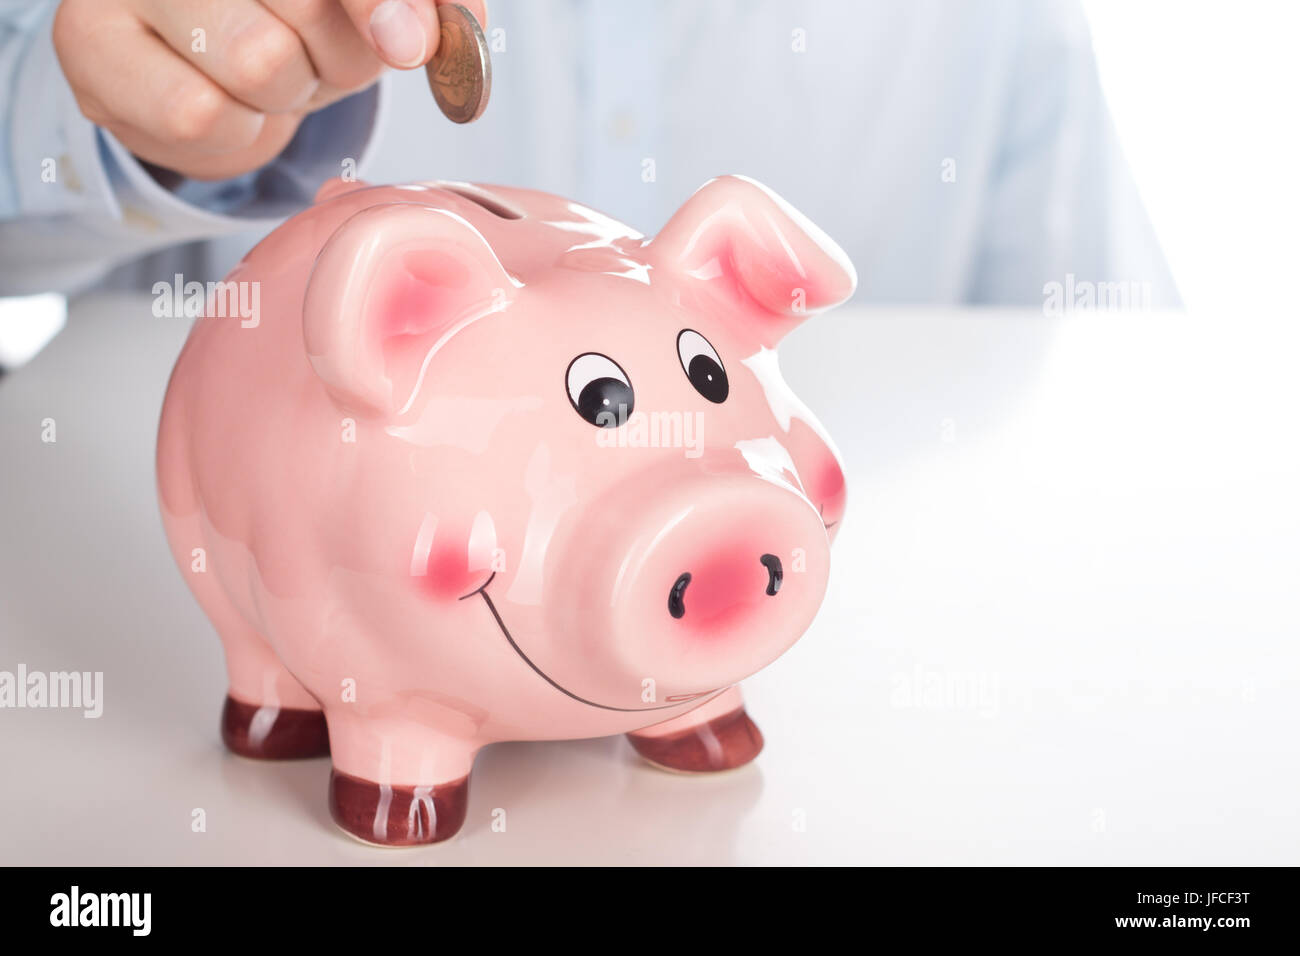 Business man hand putting coin into funny pink piggy bank. Saving money, insurance or investment concept Stock Photo